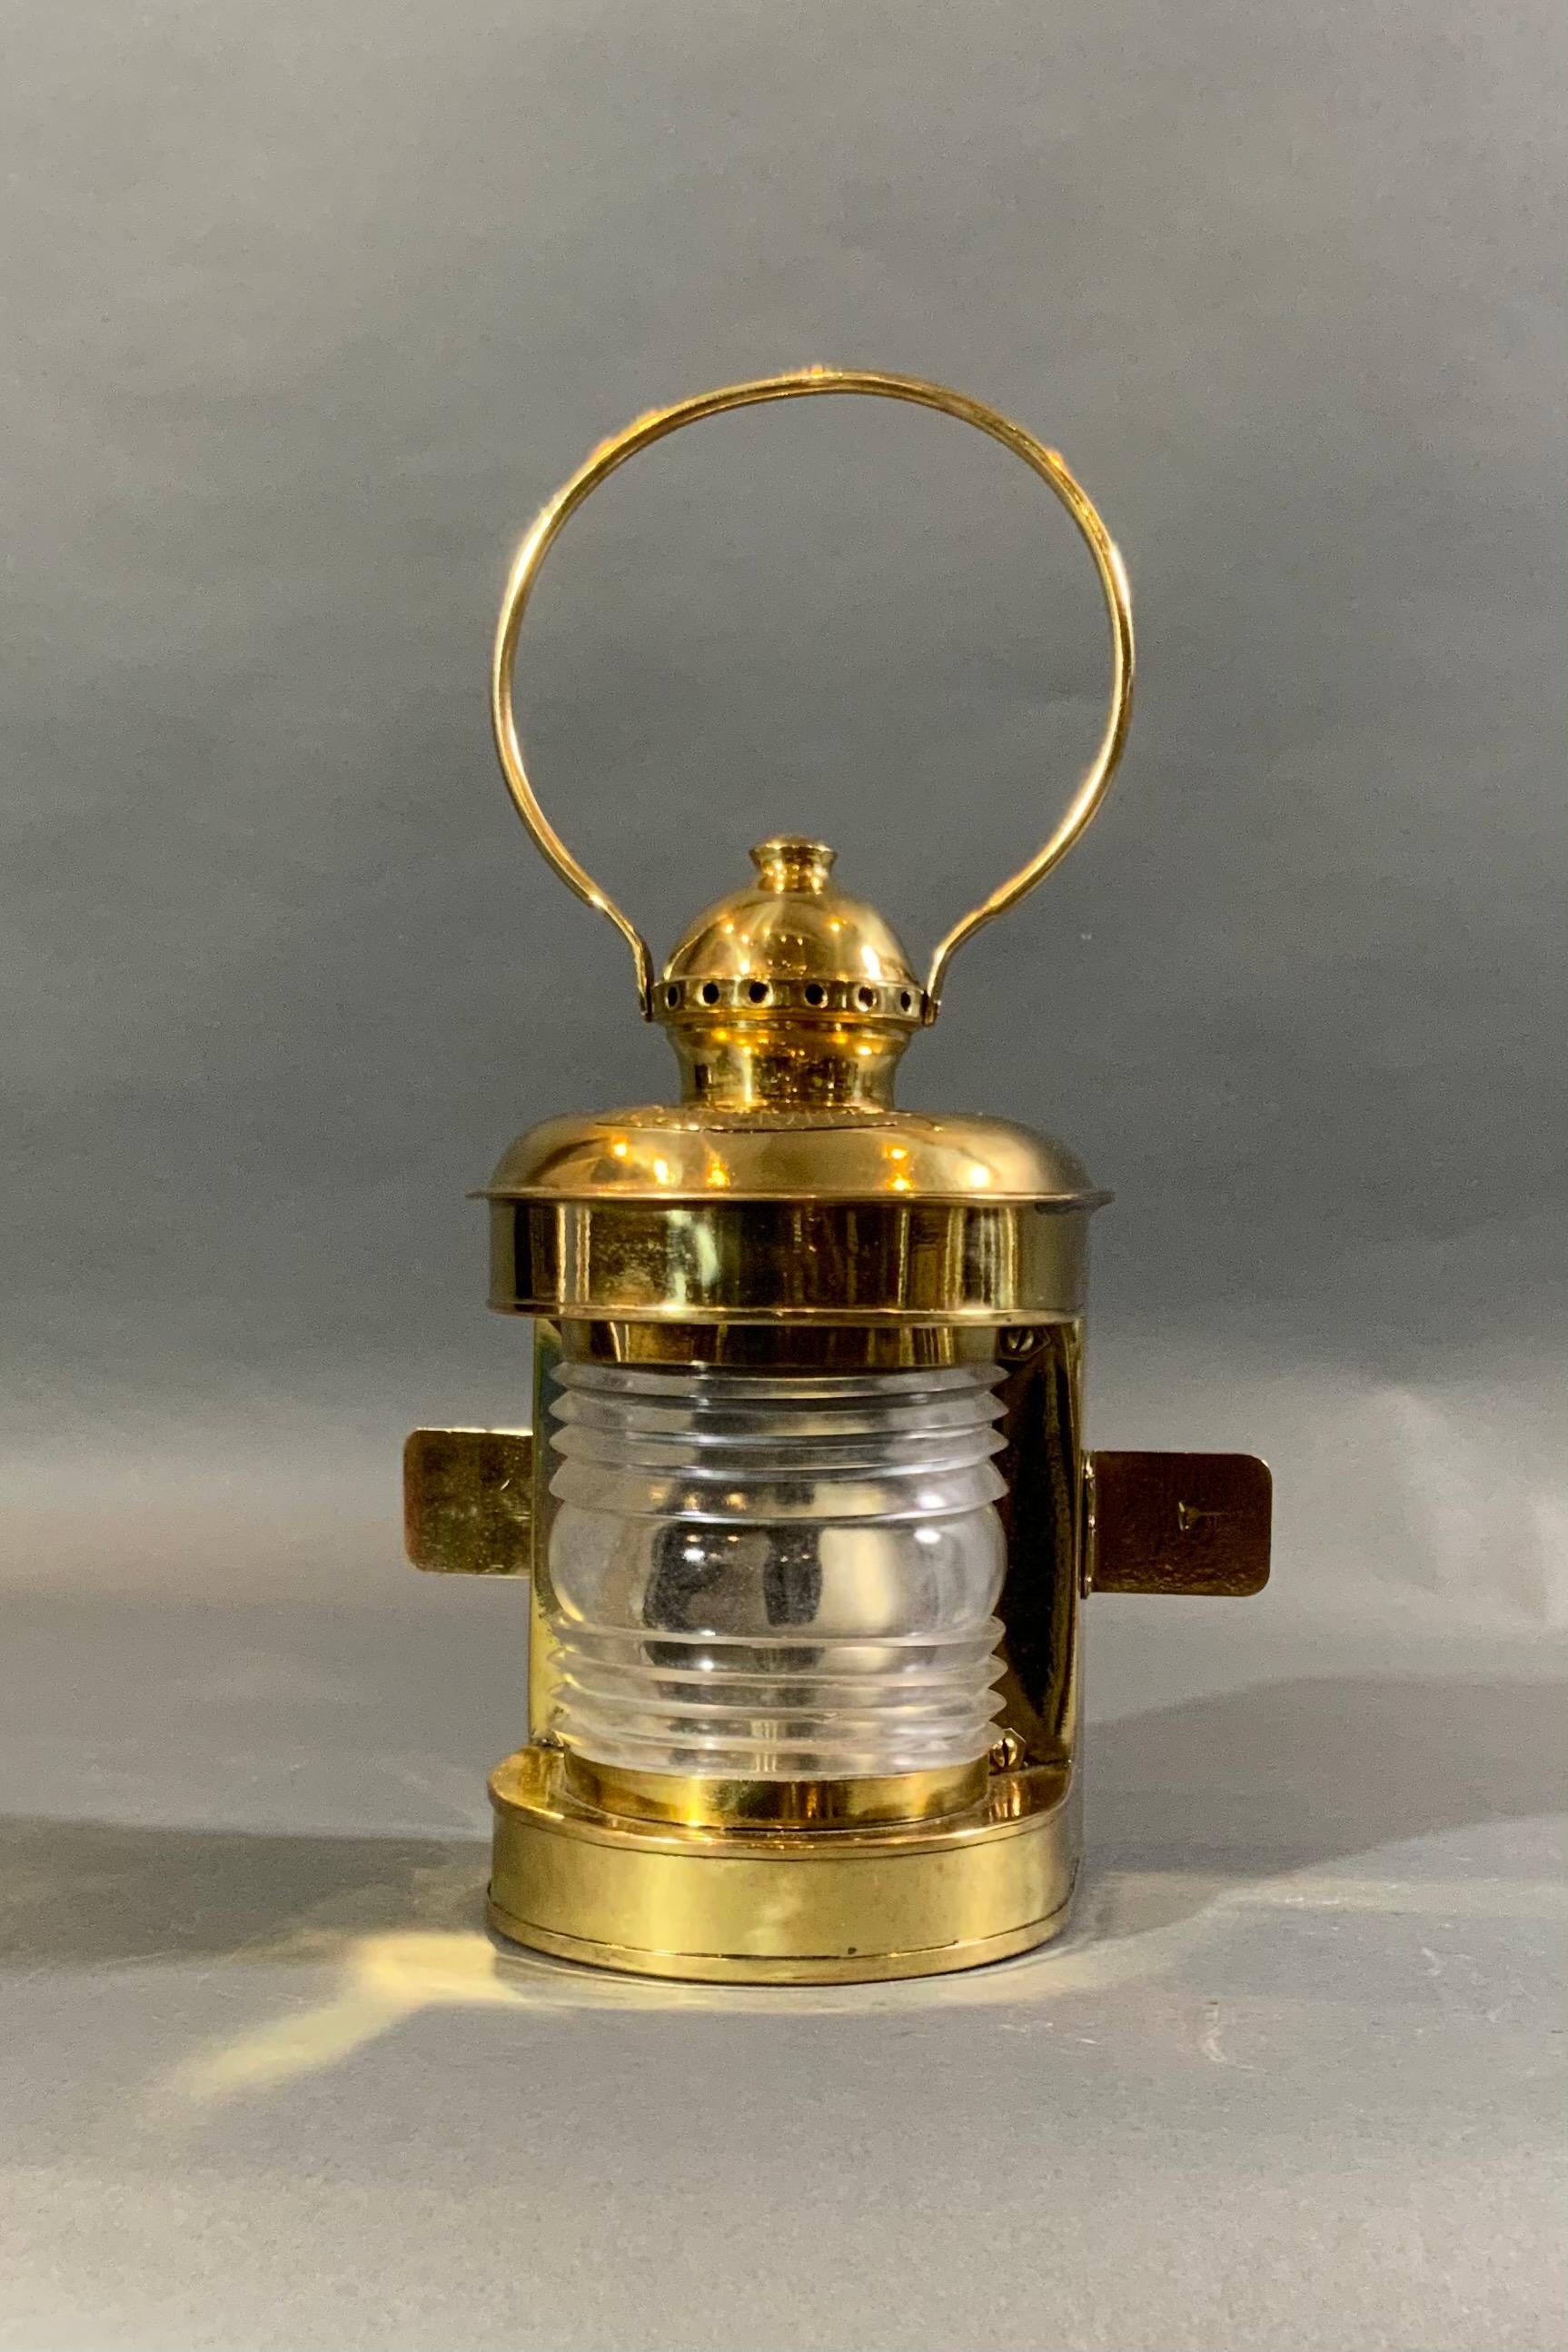 Ships lantern that has been meticulously polished and lacquered. Hinged rear door, Fresnel lens, vented top, carry handle. With polished burner inside. By Universal Metal Spinning and Stamping CO New York. Weight is 4 lbs. 10